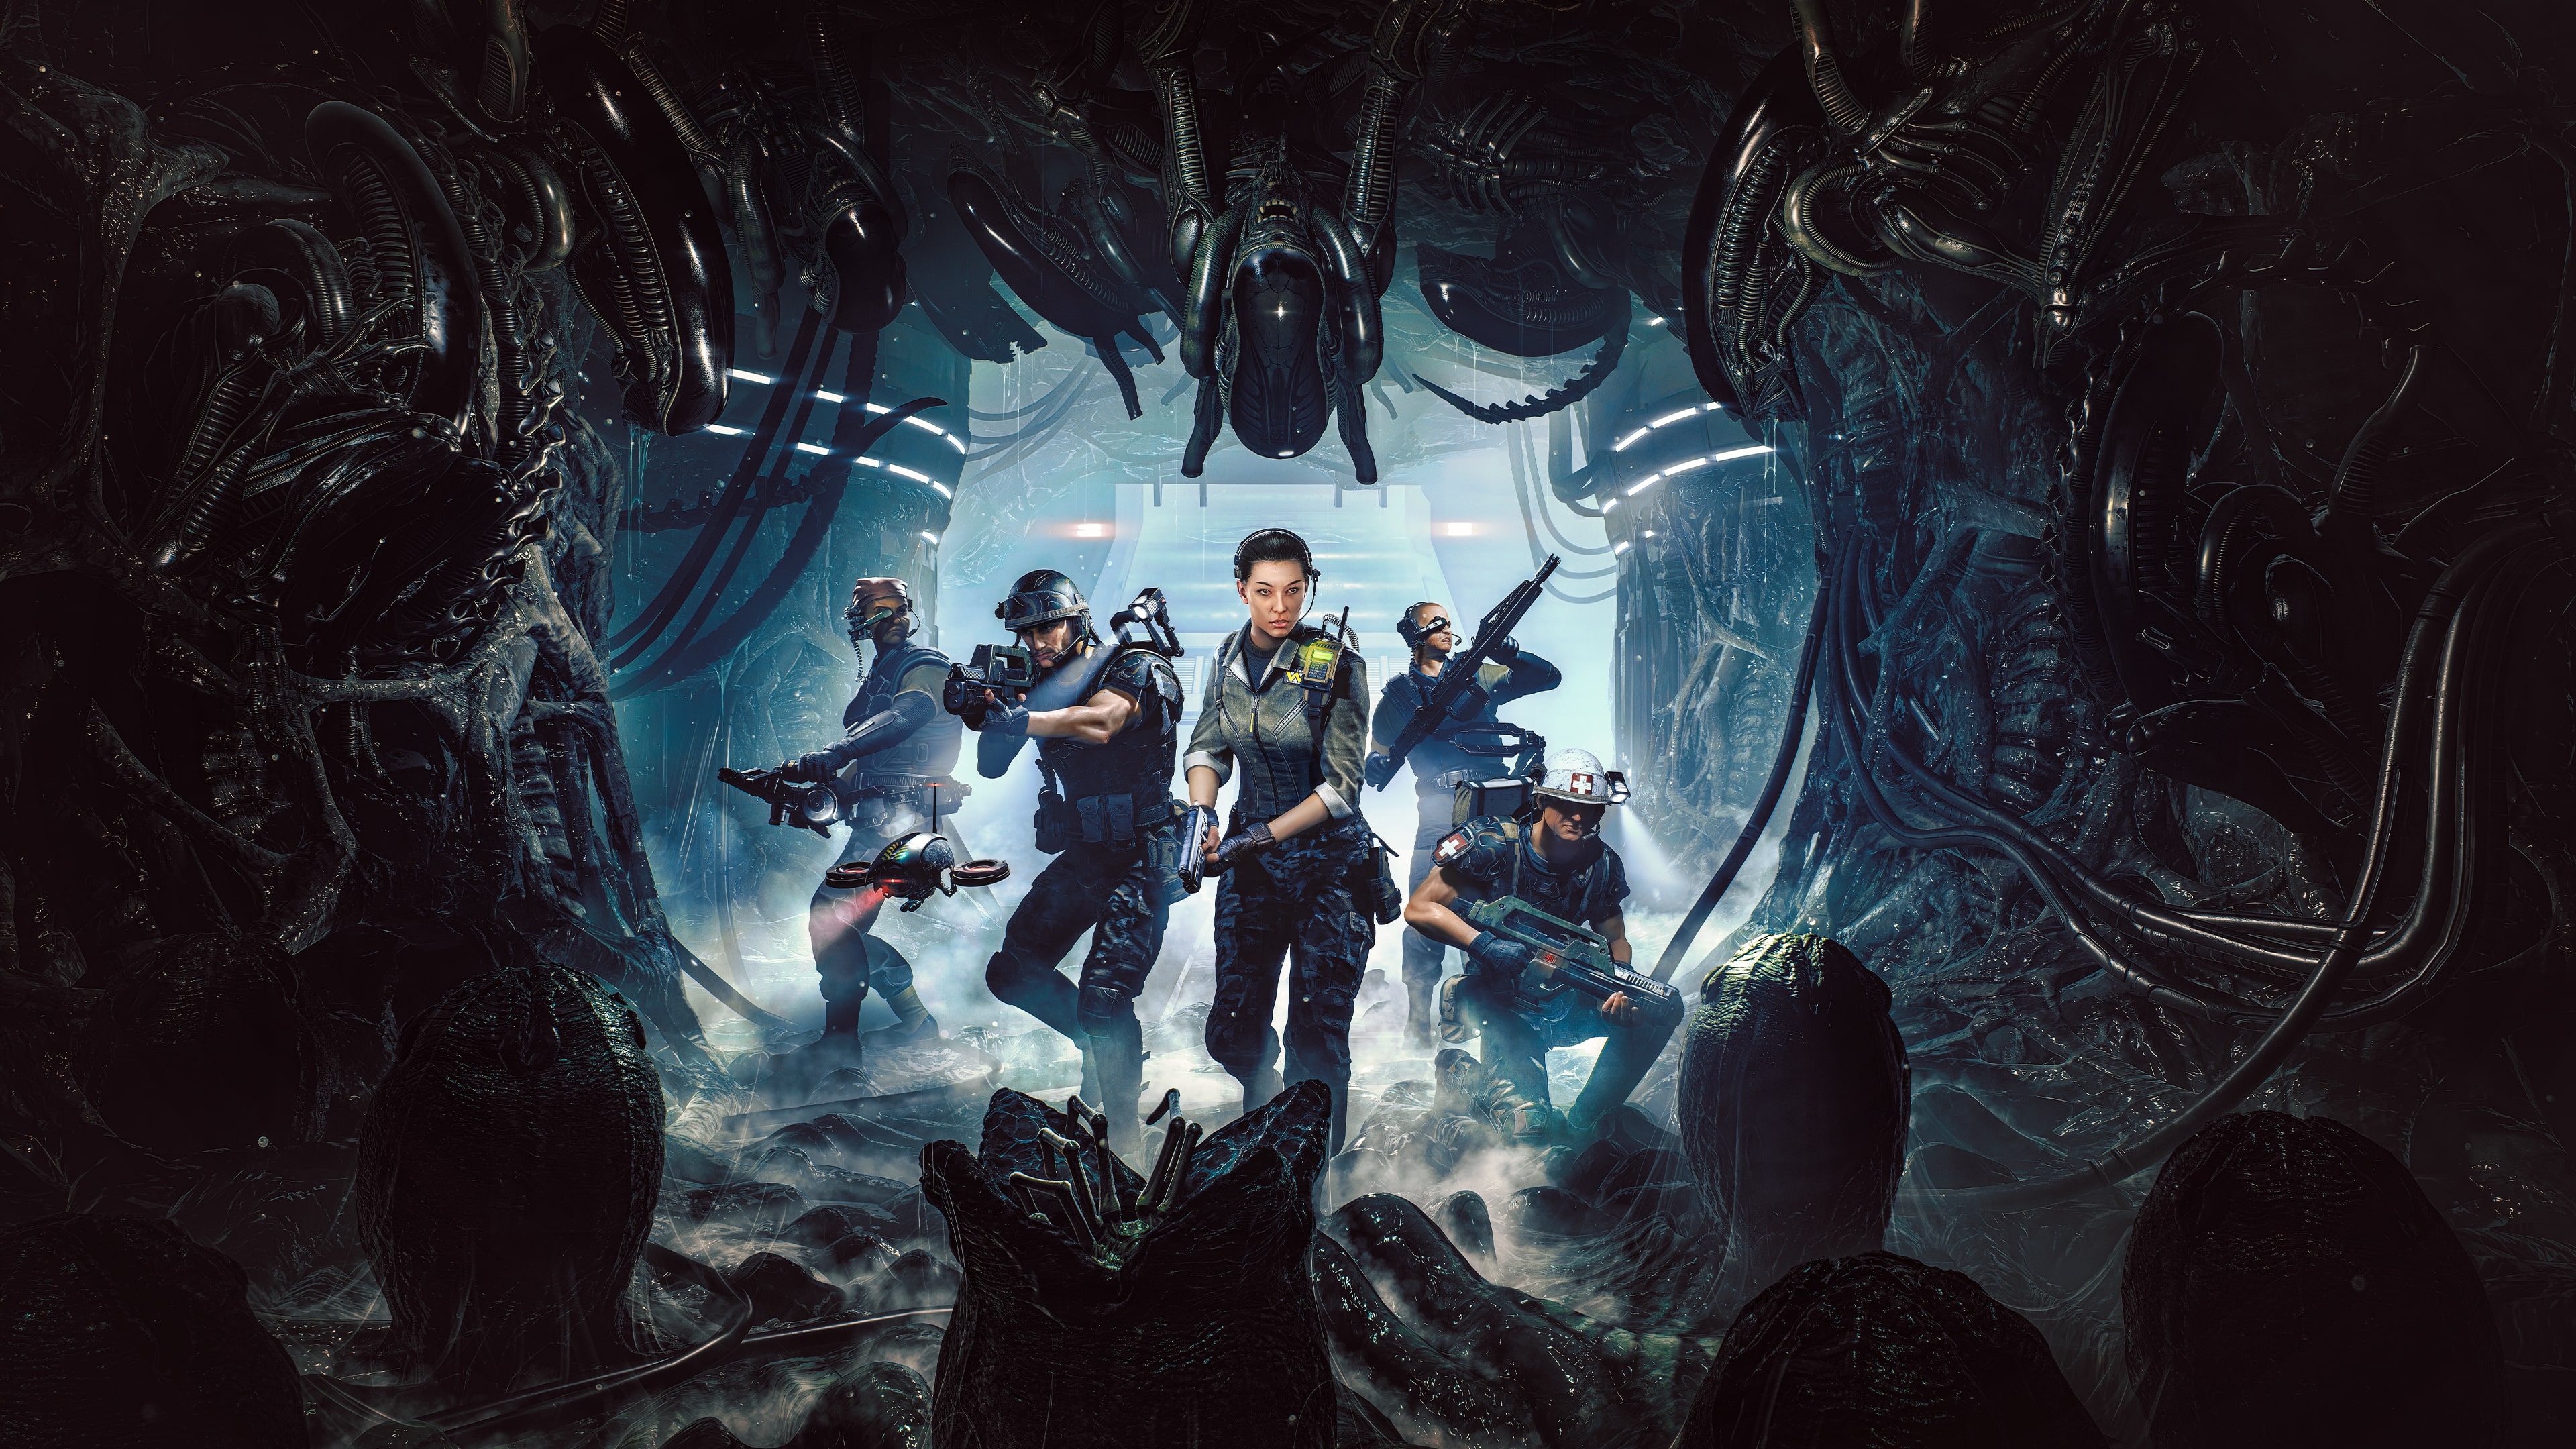 Aliens: Dark Descent (Simplified Chinese, English, Korean, Japanese, Traditional Chinese)